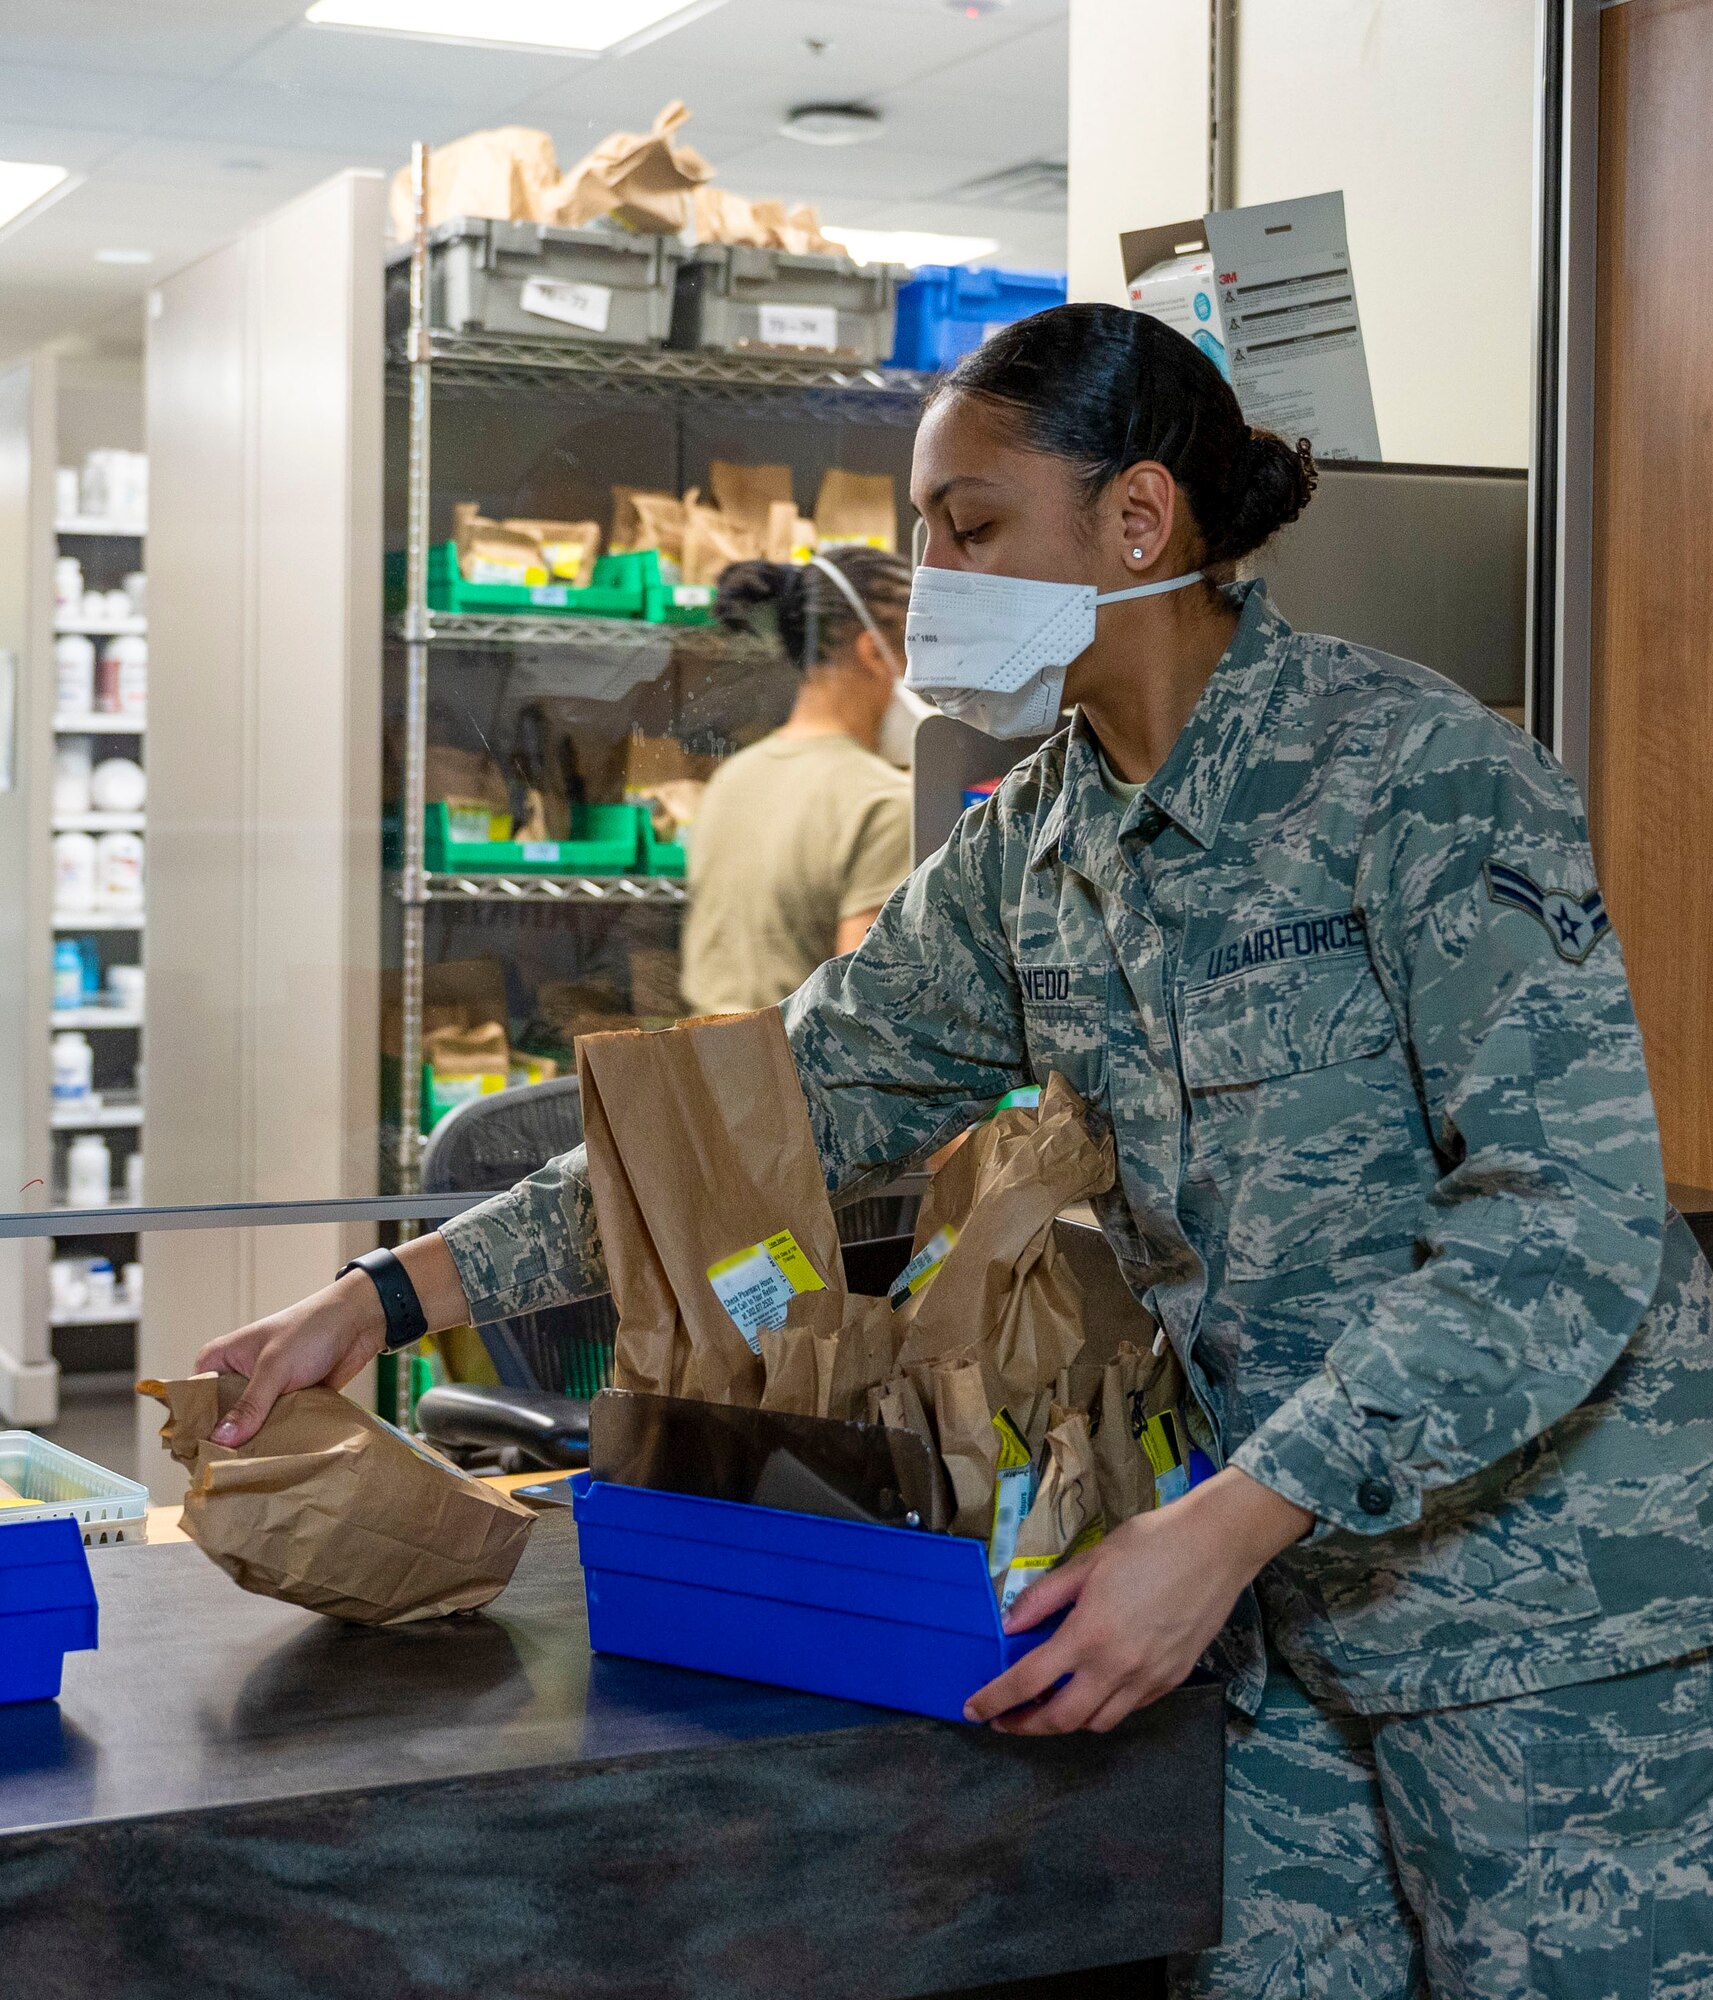 Airman 1st Class Mercedes Acevedo, 436th Medical Support Squadron pharmacy technician, grabs prescriptions to deliver to patients in the 436th Medical Group parking lot as part of the Park N’ Pickup system at Dover Air Force Base, Delaware, March 12, 2021. The Park N’ Pickup system is a limited contact prescription delivery process established to ensure the safety of both patients and workers and help mitigate the spread of COVID-19. (This photo has been digitally enhanced to protect patient information) (U.S. Air Force photo by Airman 1st Class Cydney Lee)